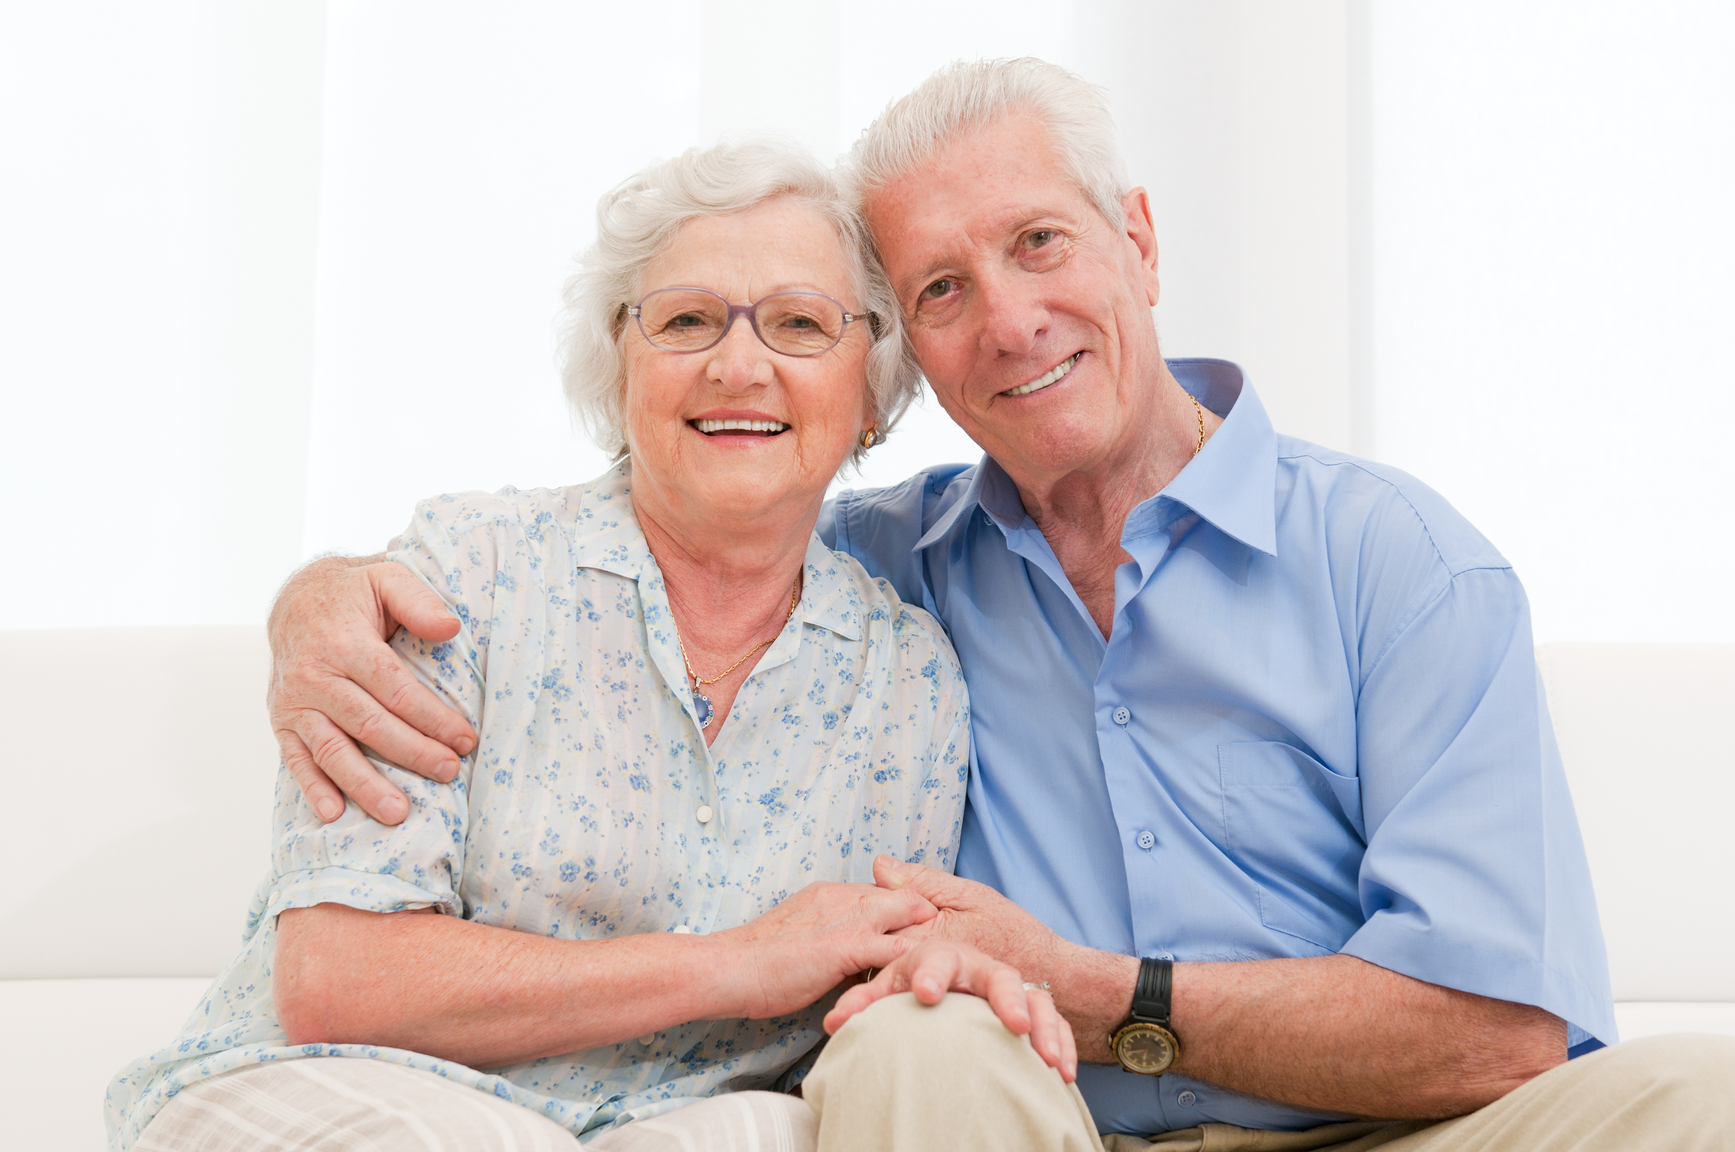 Most Reputable Seniors Online Dating Site In Orlando